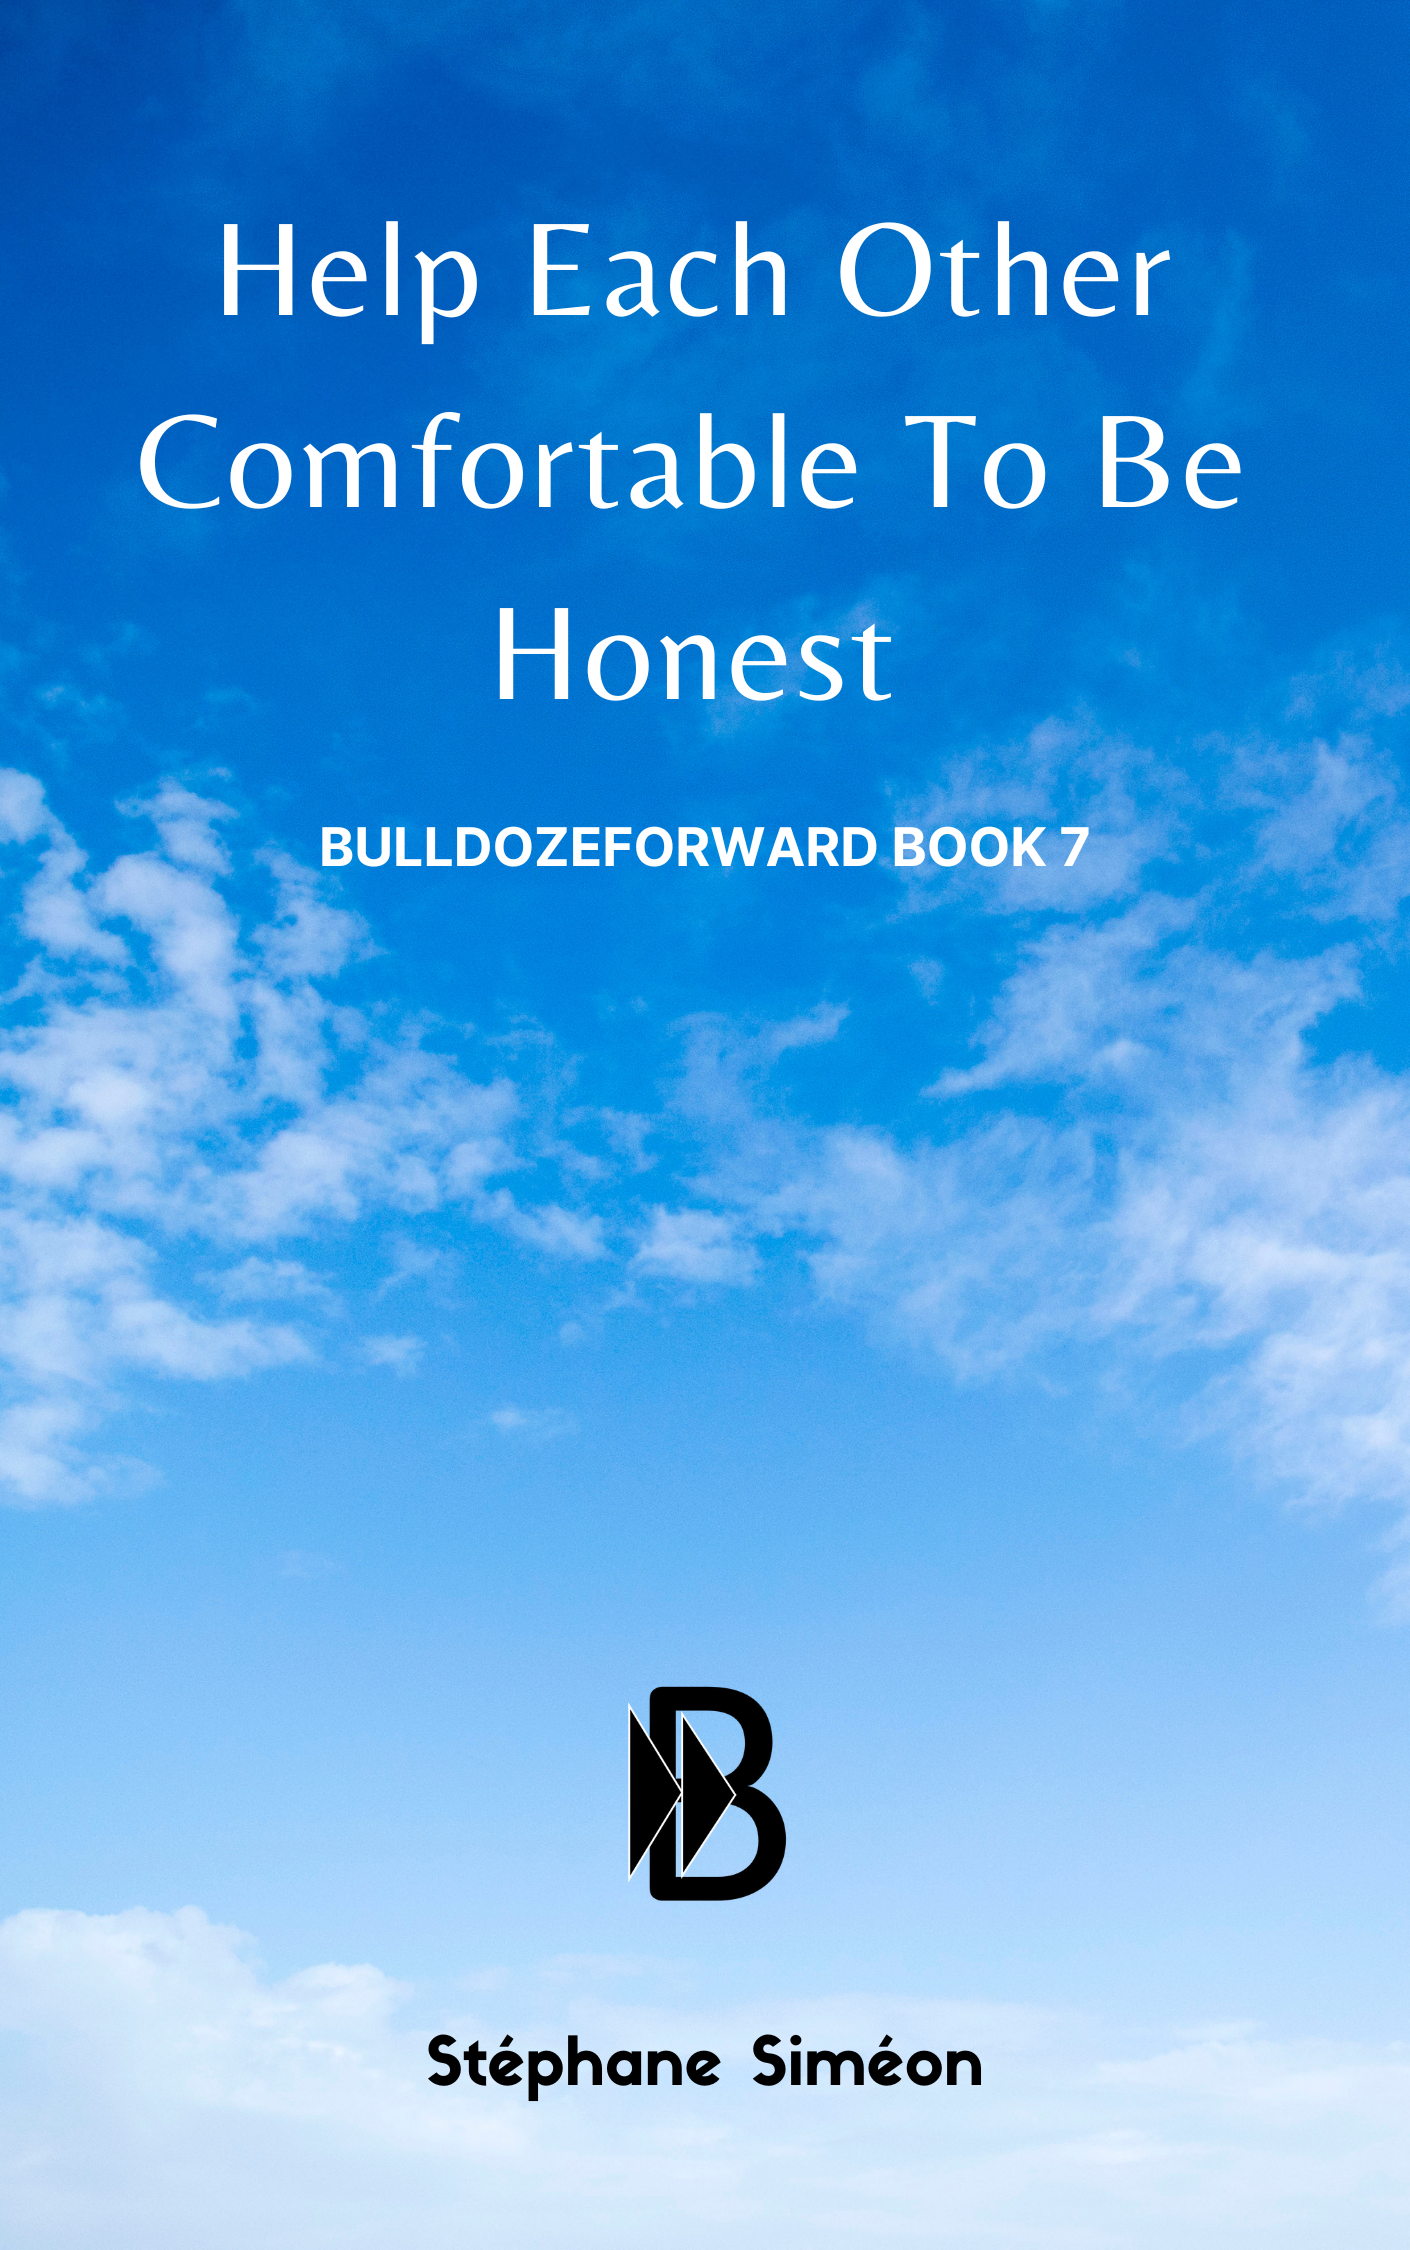 BulldozeForward Book 7 Help Each Other Comfortable To Be Honest.png